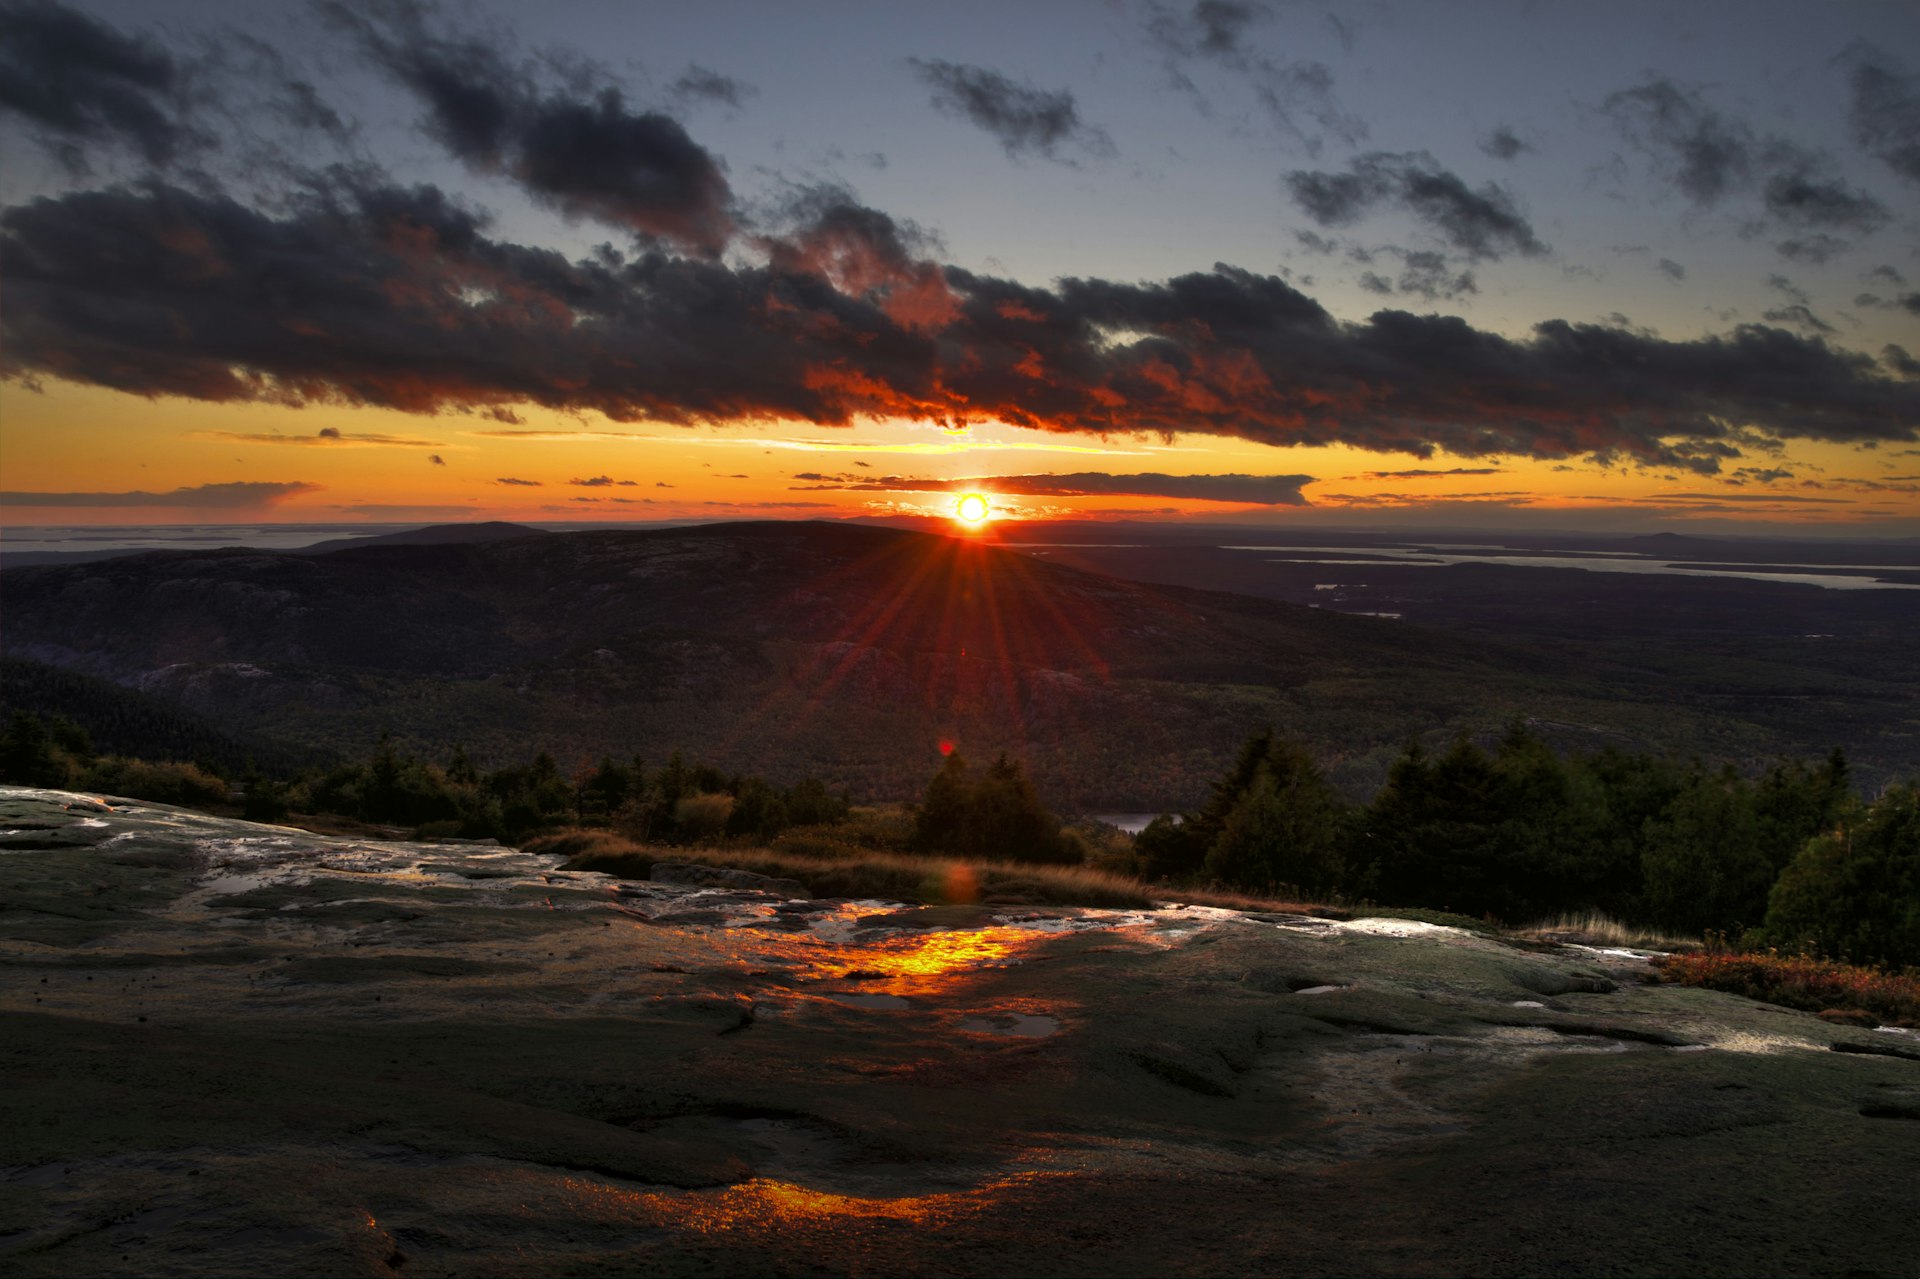 Sunrise view from Cadillac Mountain in Acadia National Park